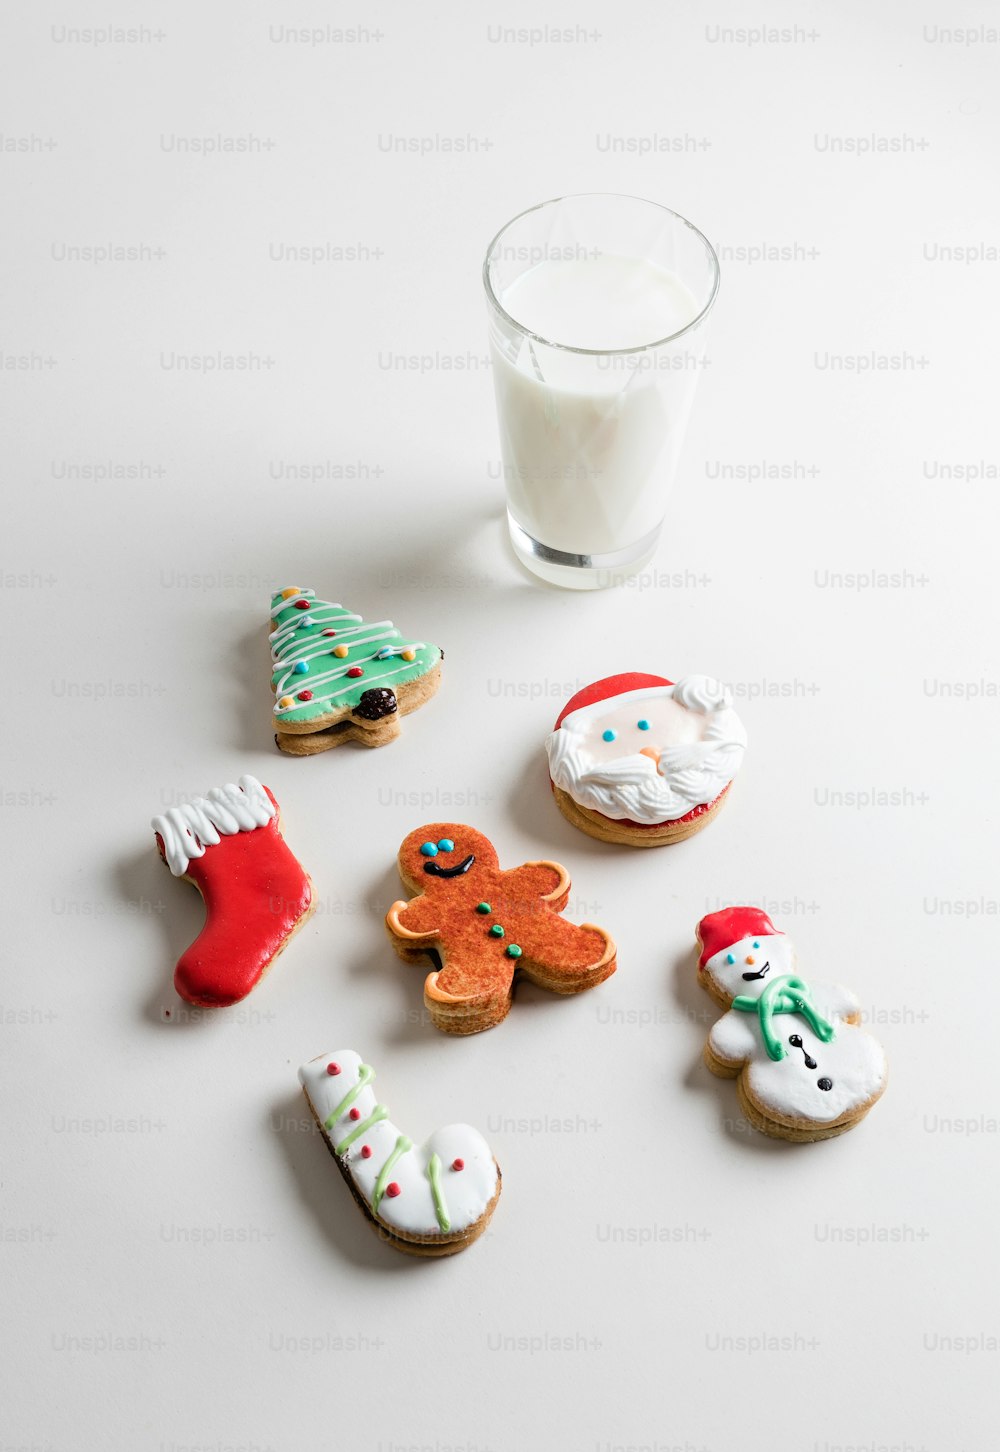 a glass of milk and some decorated cookies